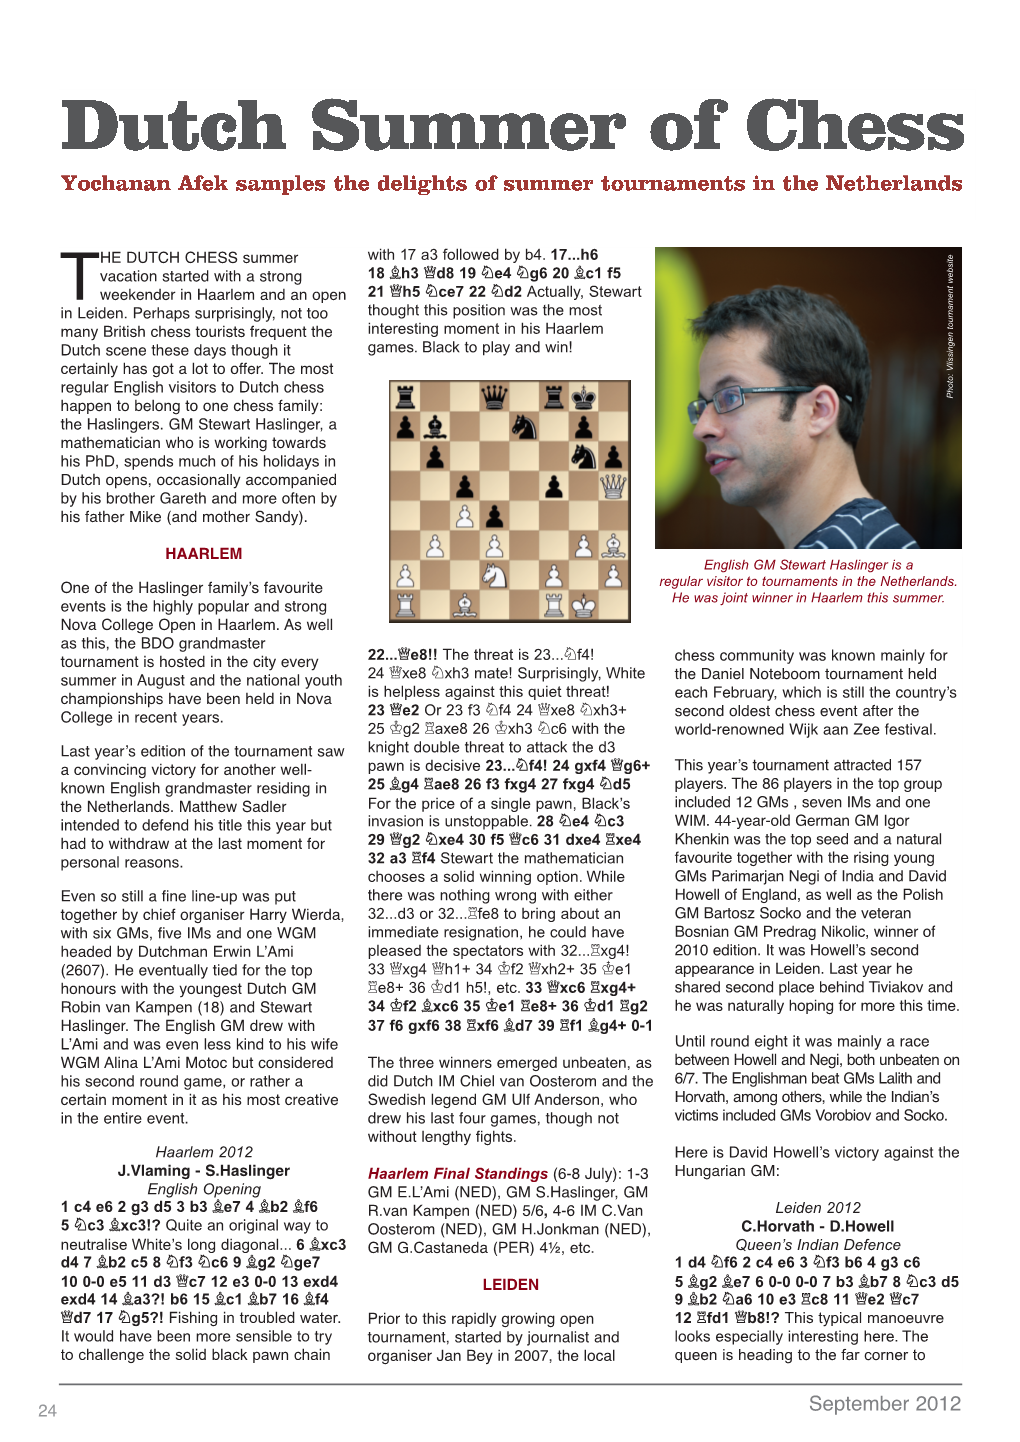 Chess Mag - 21 6 10 28/08/2012 12:45 Page 24 E T with 17 A3 Followed by B4